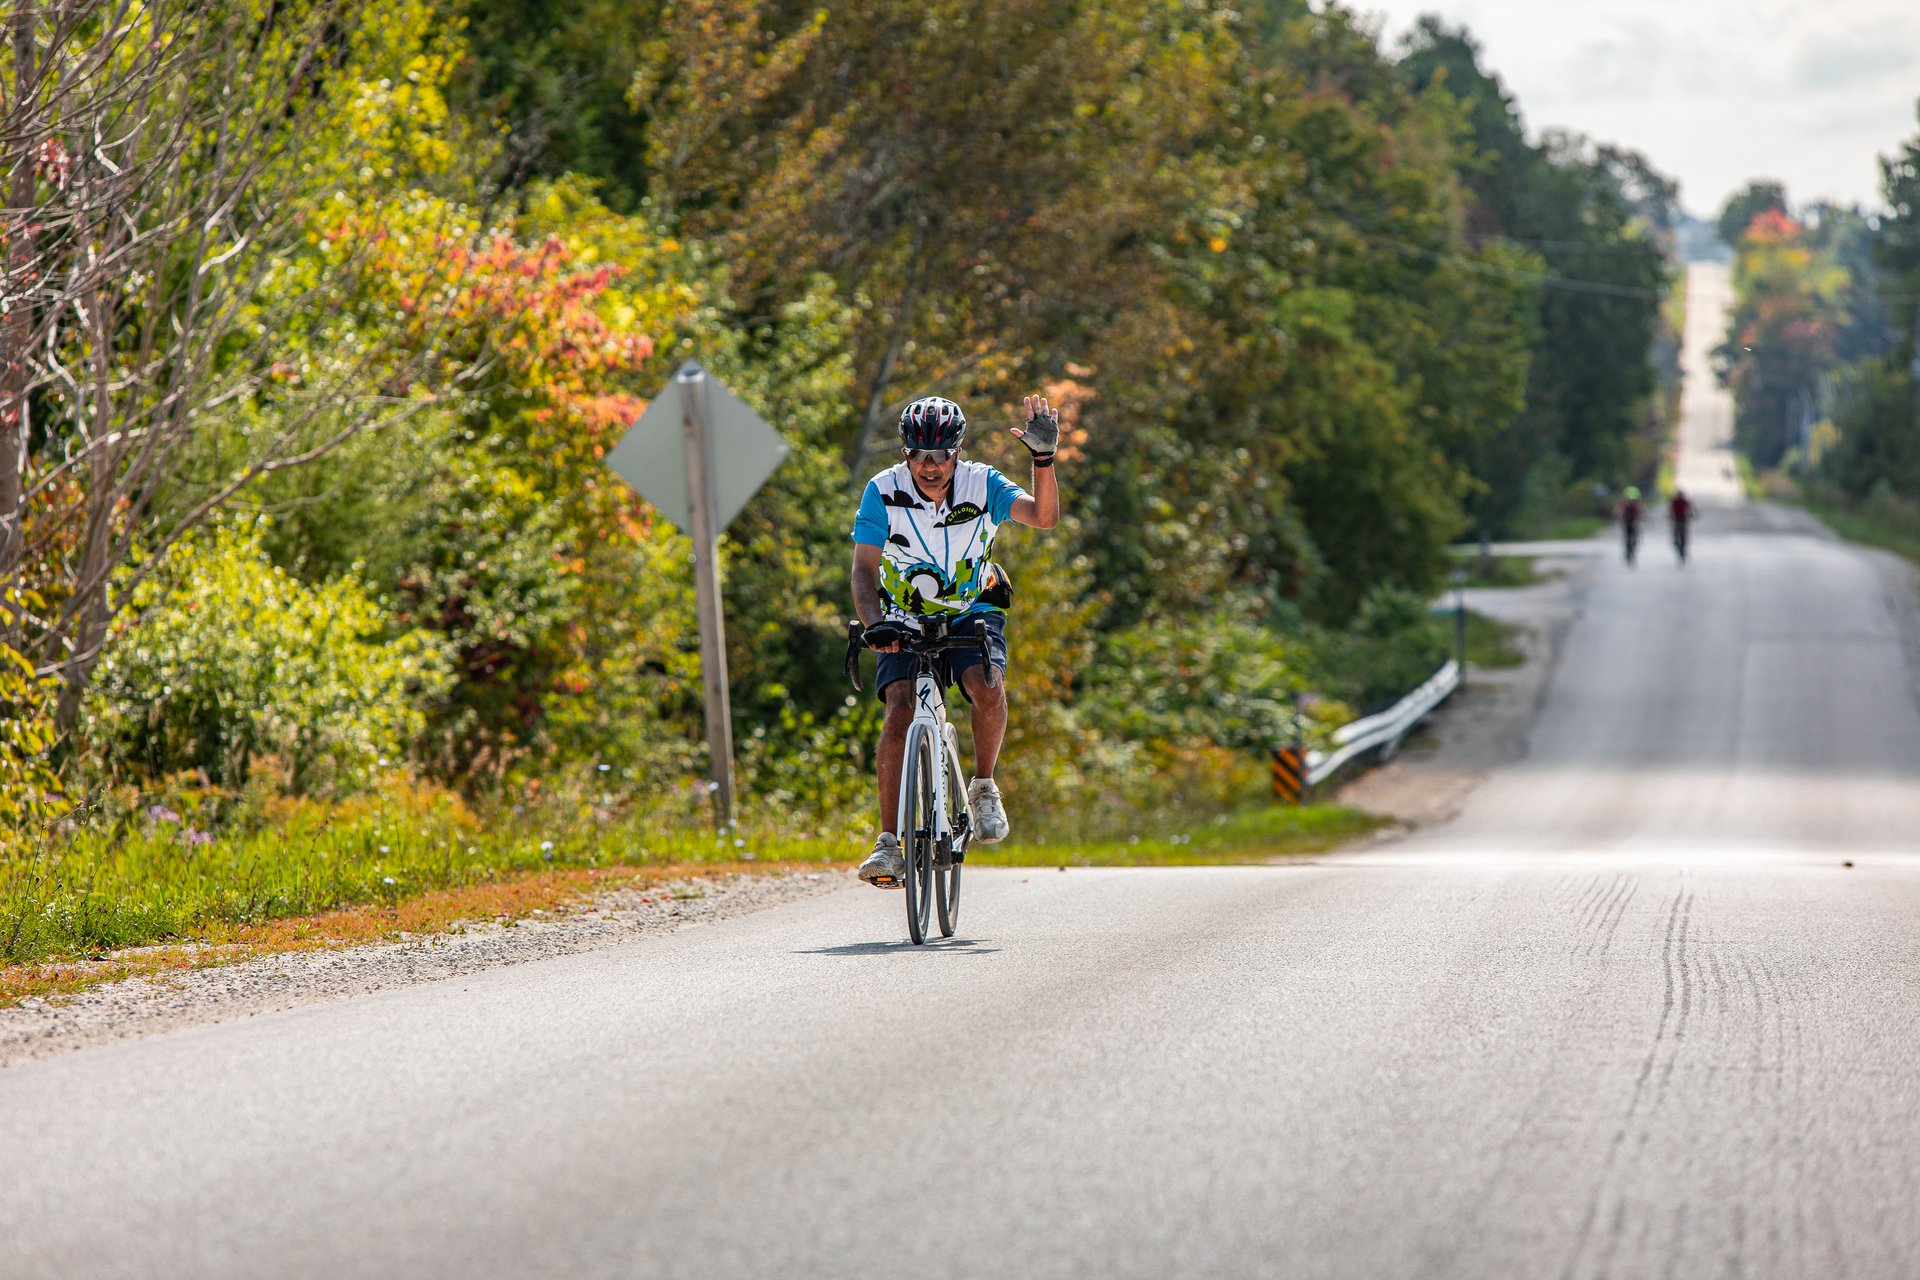 a man waves while cycling along a rural road in Ontario